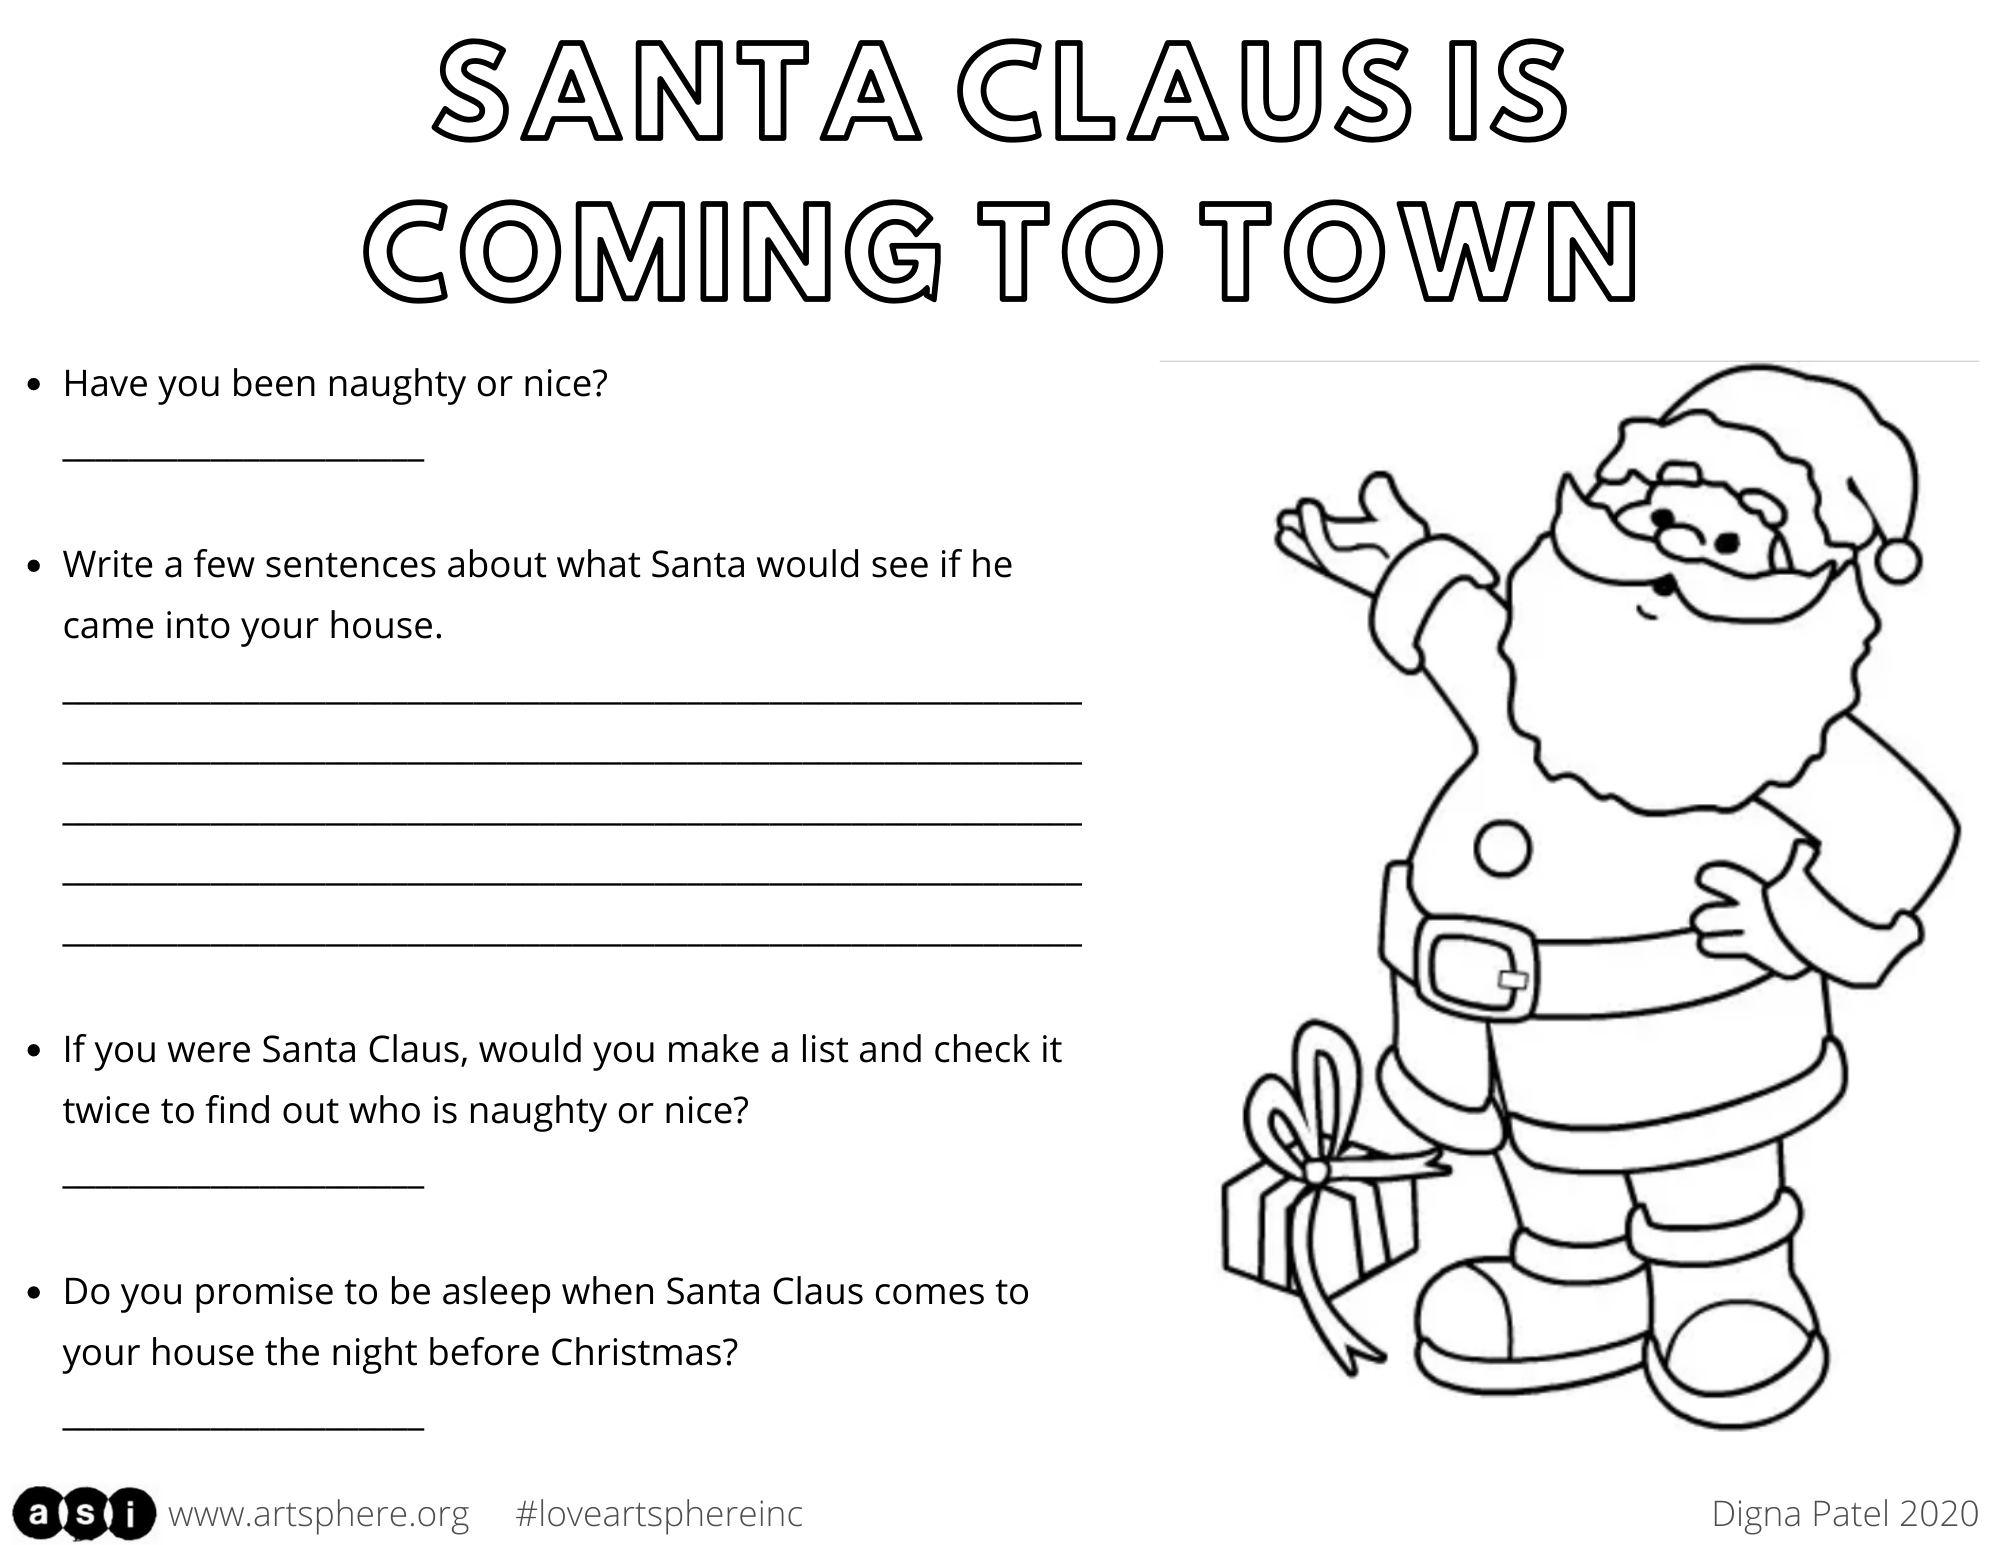 Santa claus is coming to town handout art sphere inc